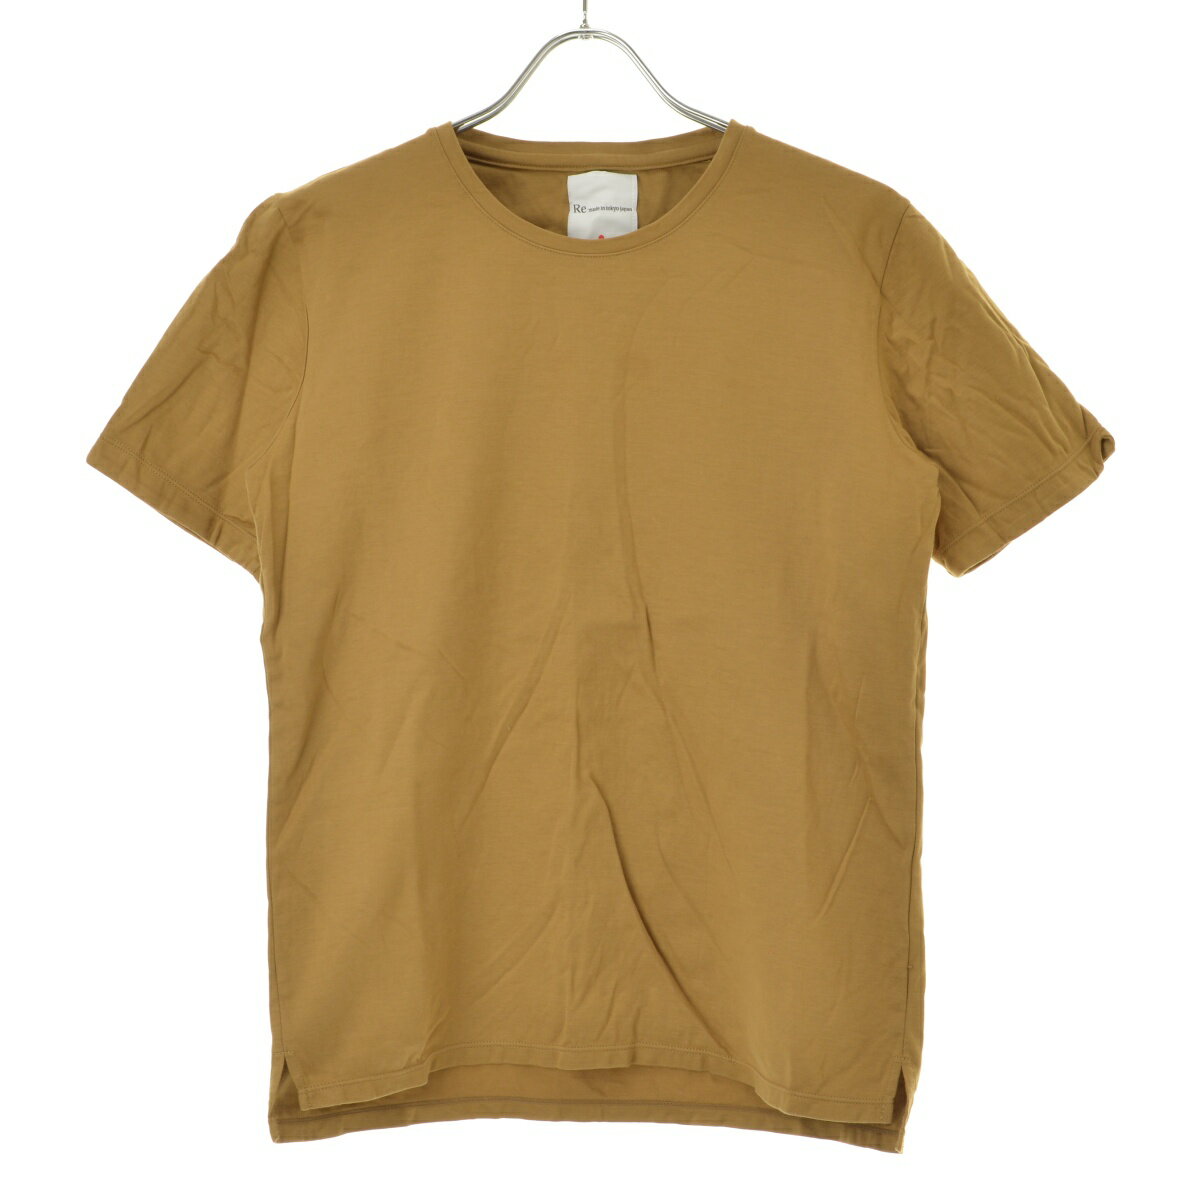 yÁzRe made in tokyo japan / A[C[ ChCgELEWpTOKYO MADE DRESS T-SHIRTTVcycaceabcj-mz